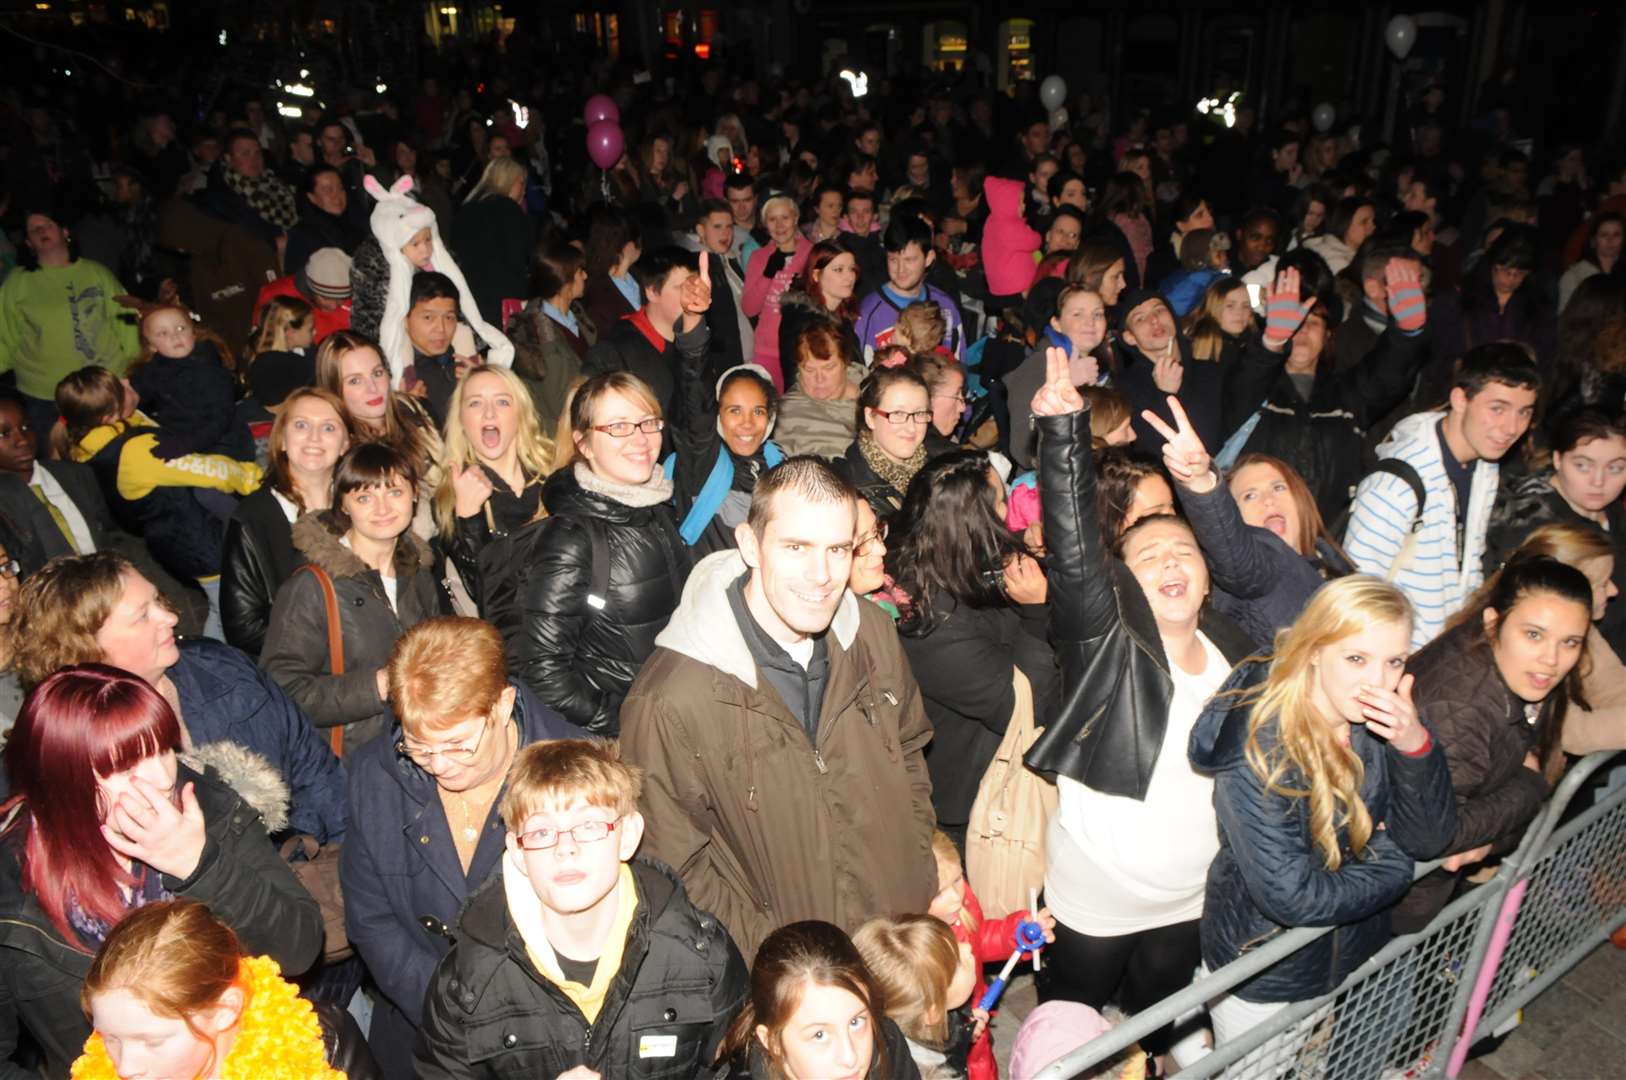 The last Christmas lights switch-on event in Jubilee Square in 2013